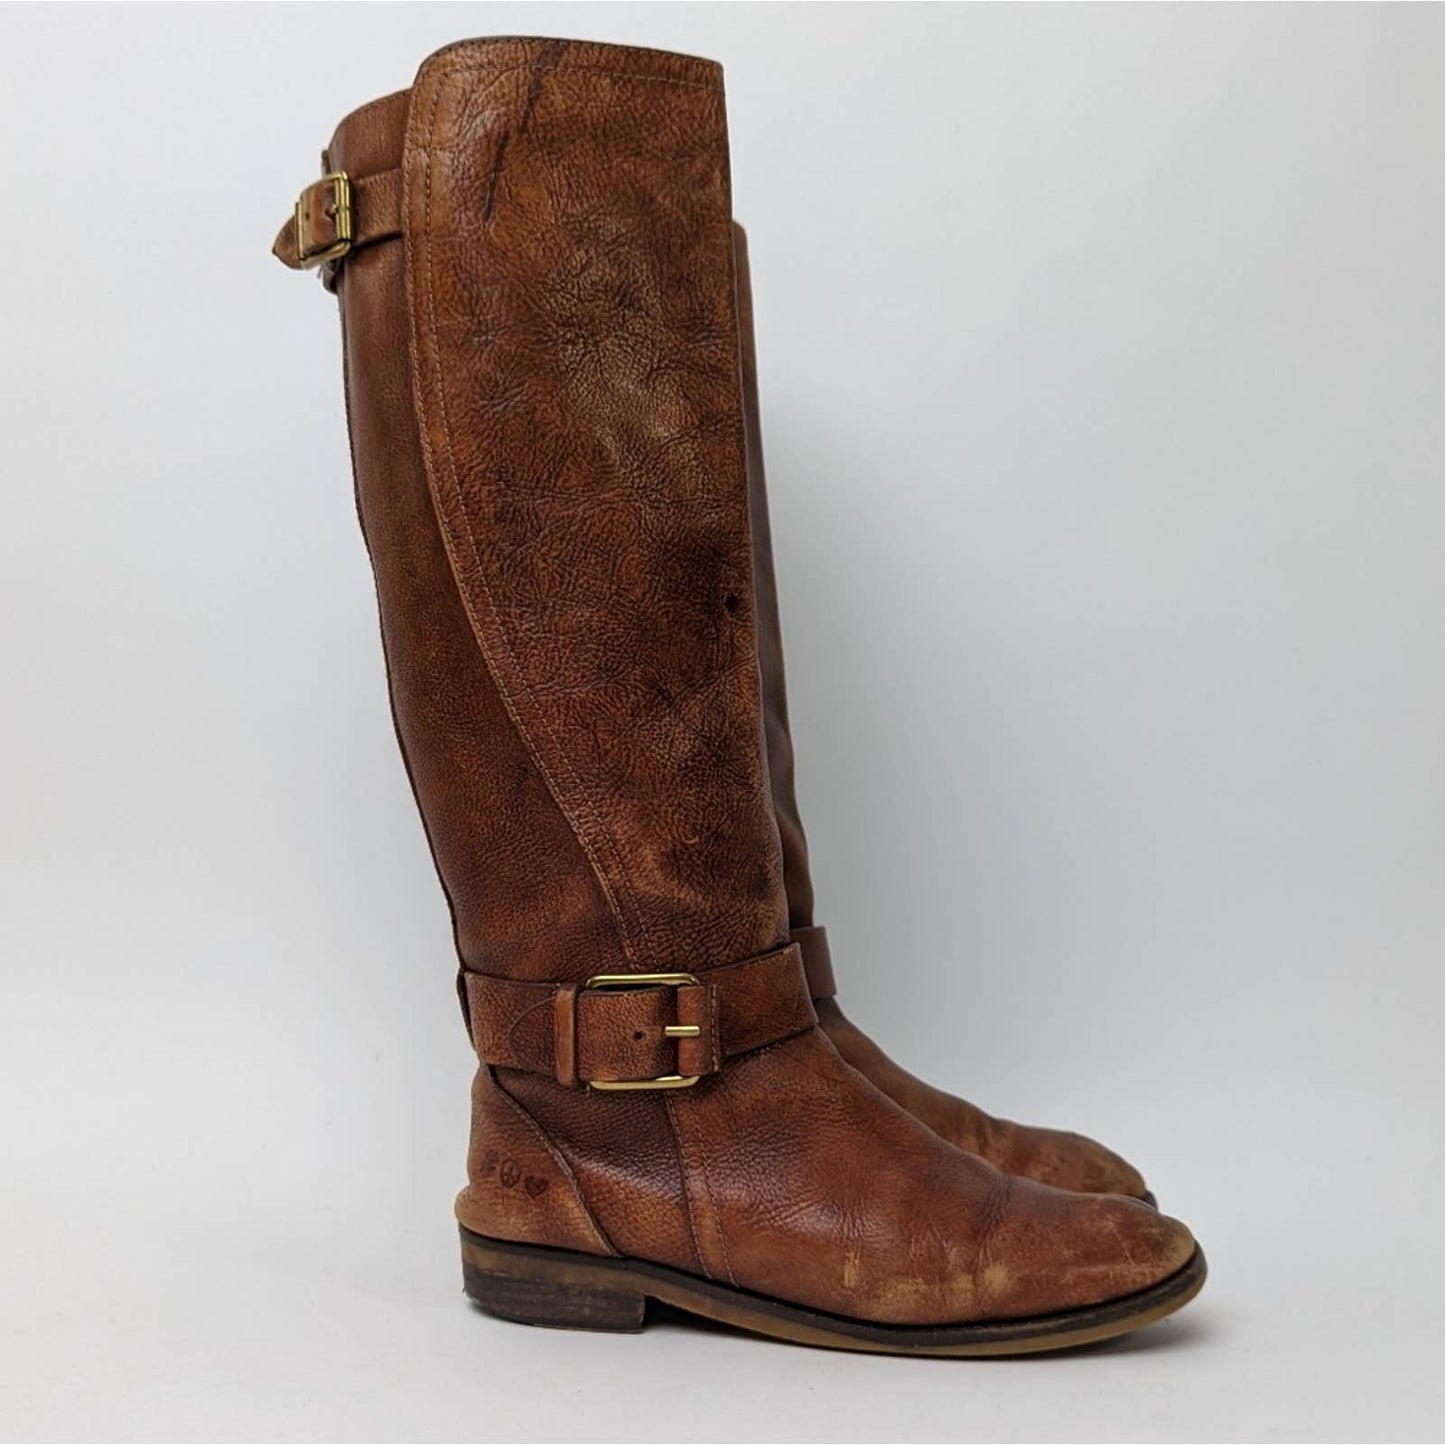 Lucky Brand Angel Riding Moto Boots - 7